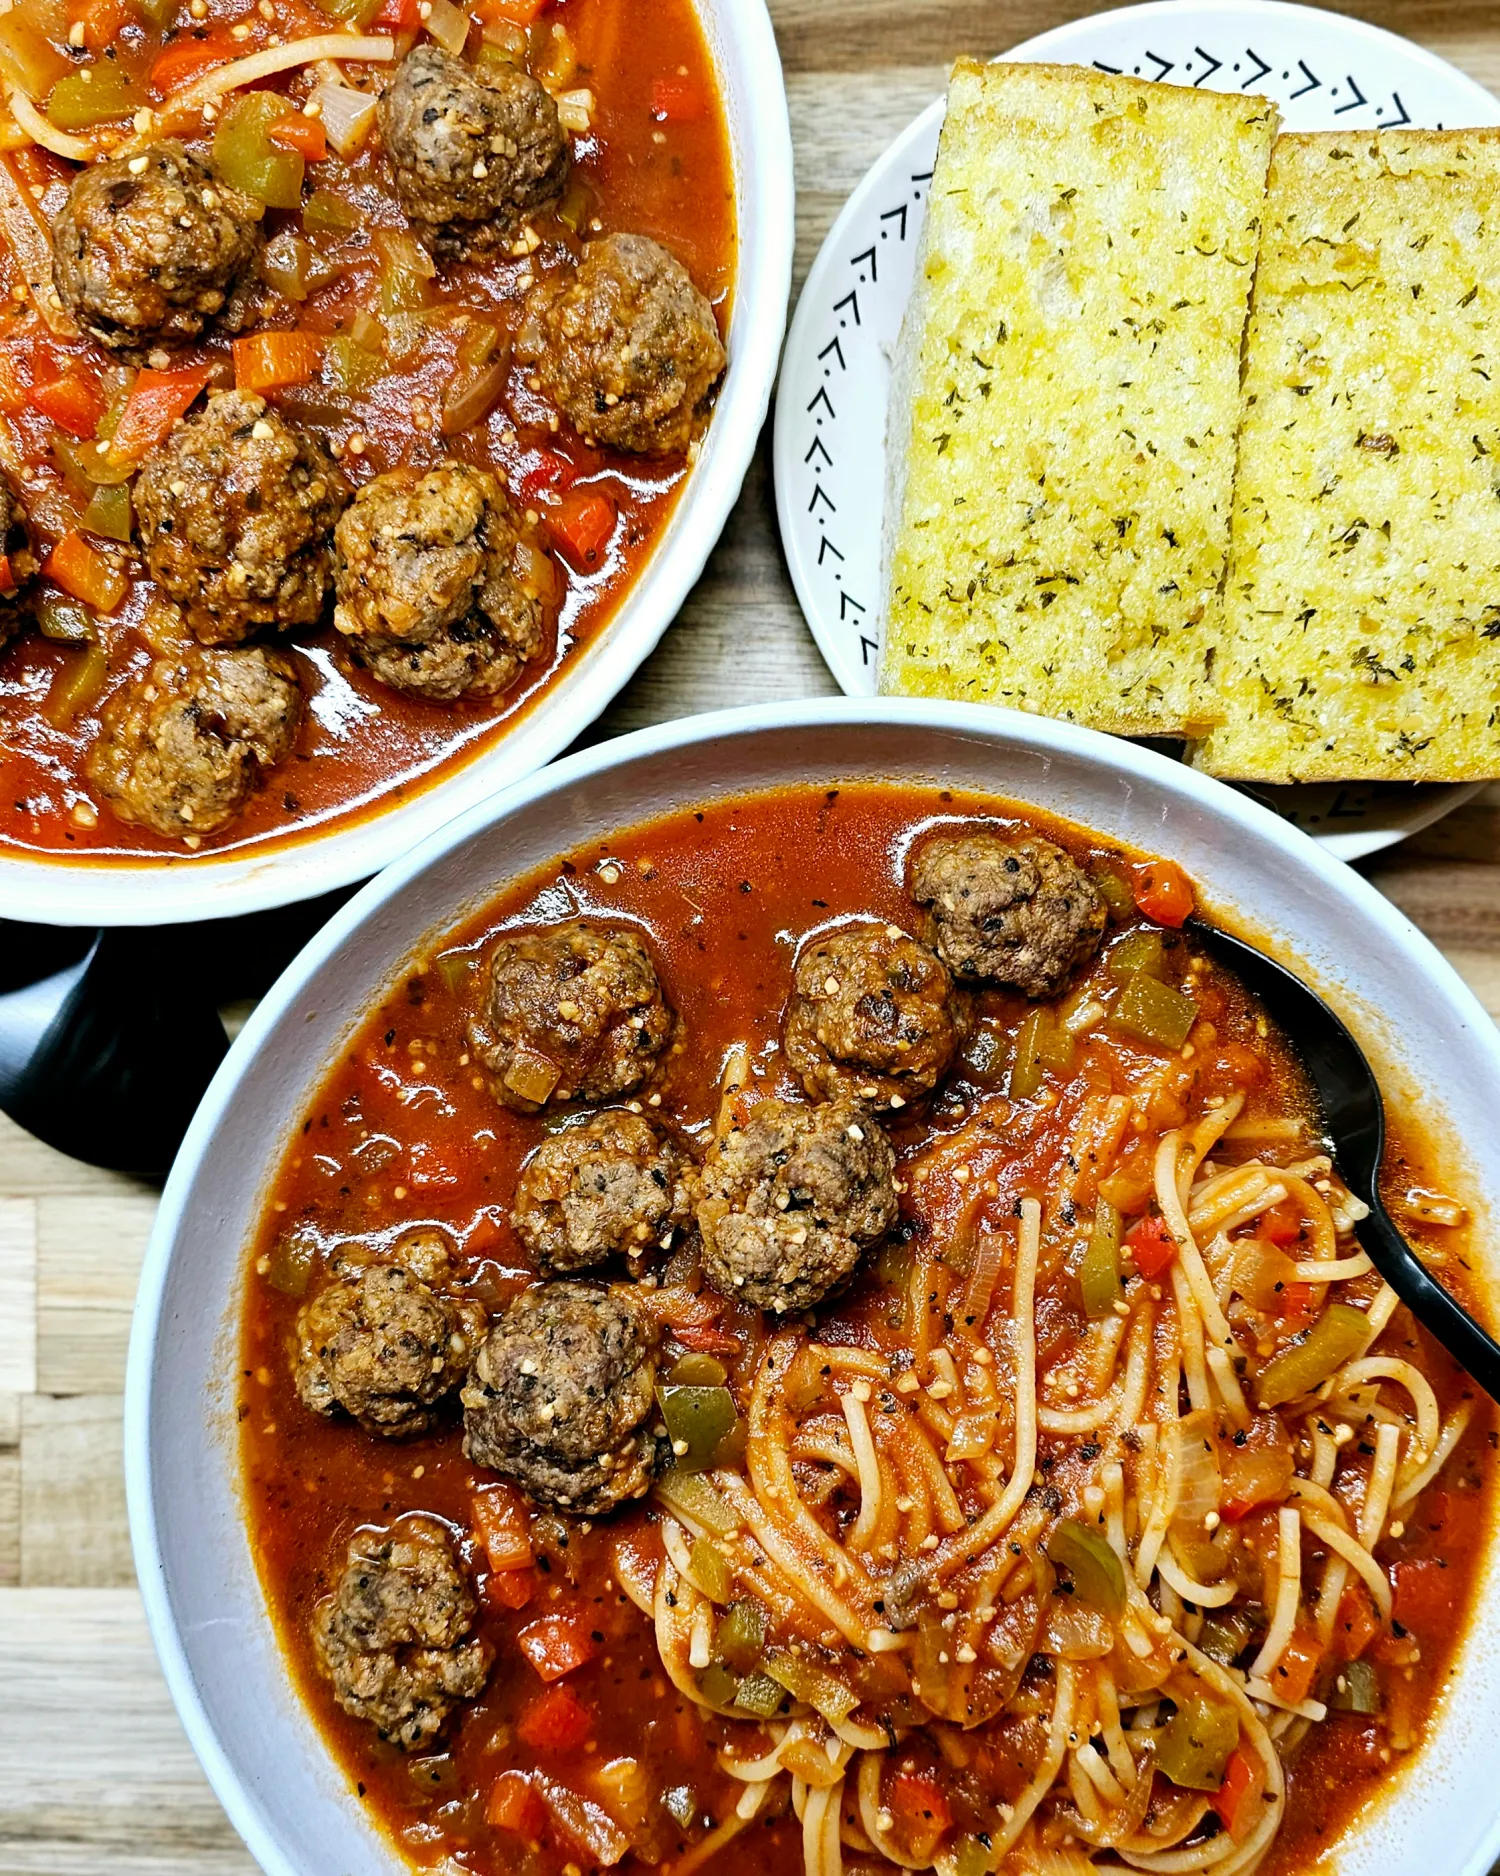 This photo shows two white bowls filled with spaghetti and meatball soup and a side of garlic bread on a plate.